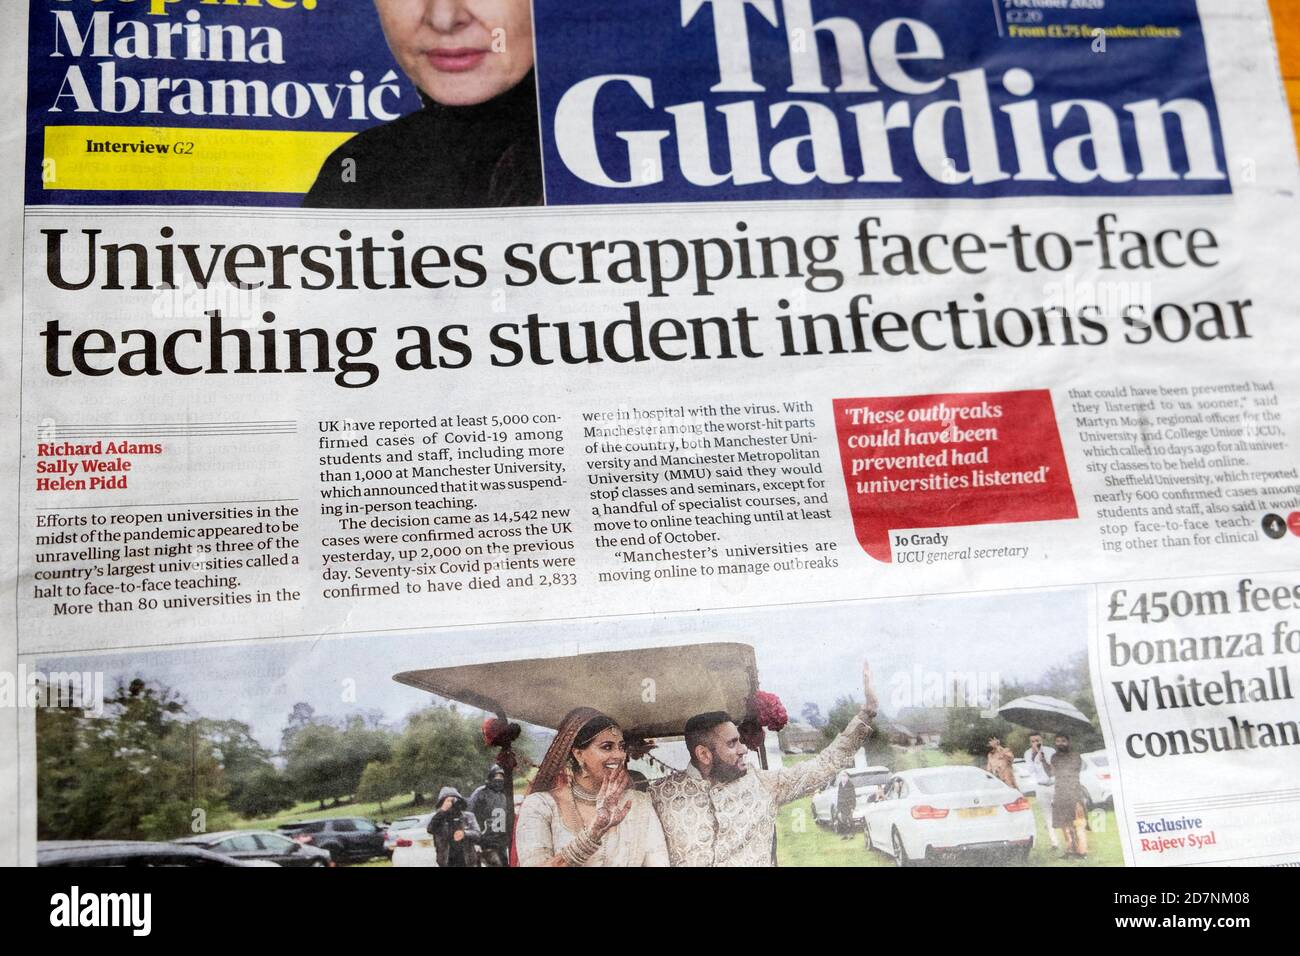 'Universities scrapping face-to-face teaching as student infections soar' Guardian newspaper headline front page 7 October 2020 London England UK Stock Photo